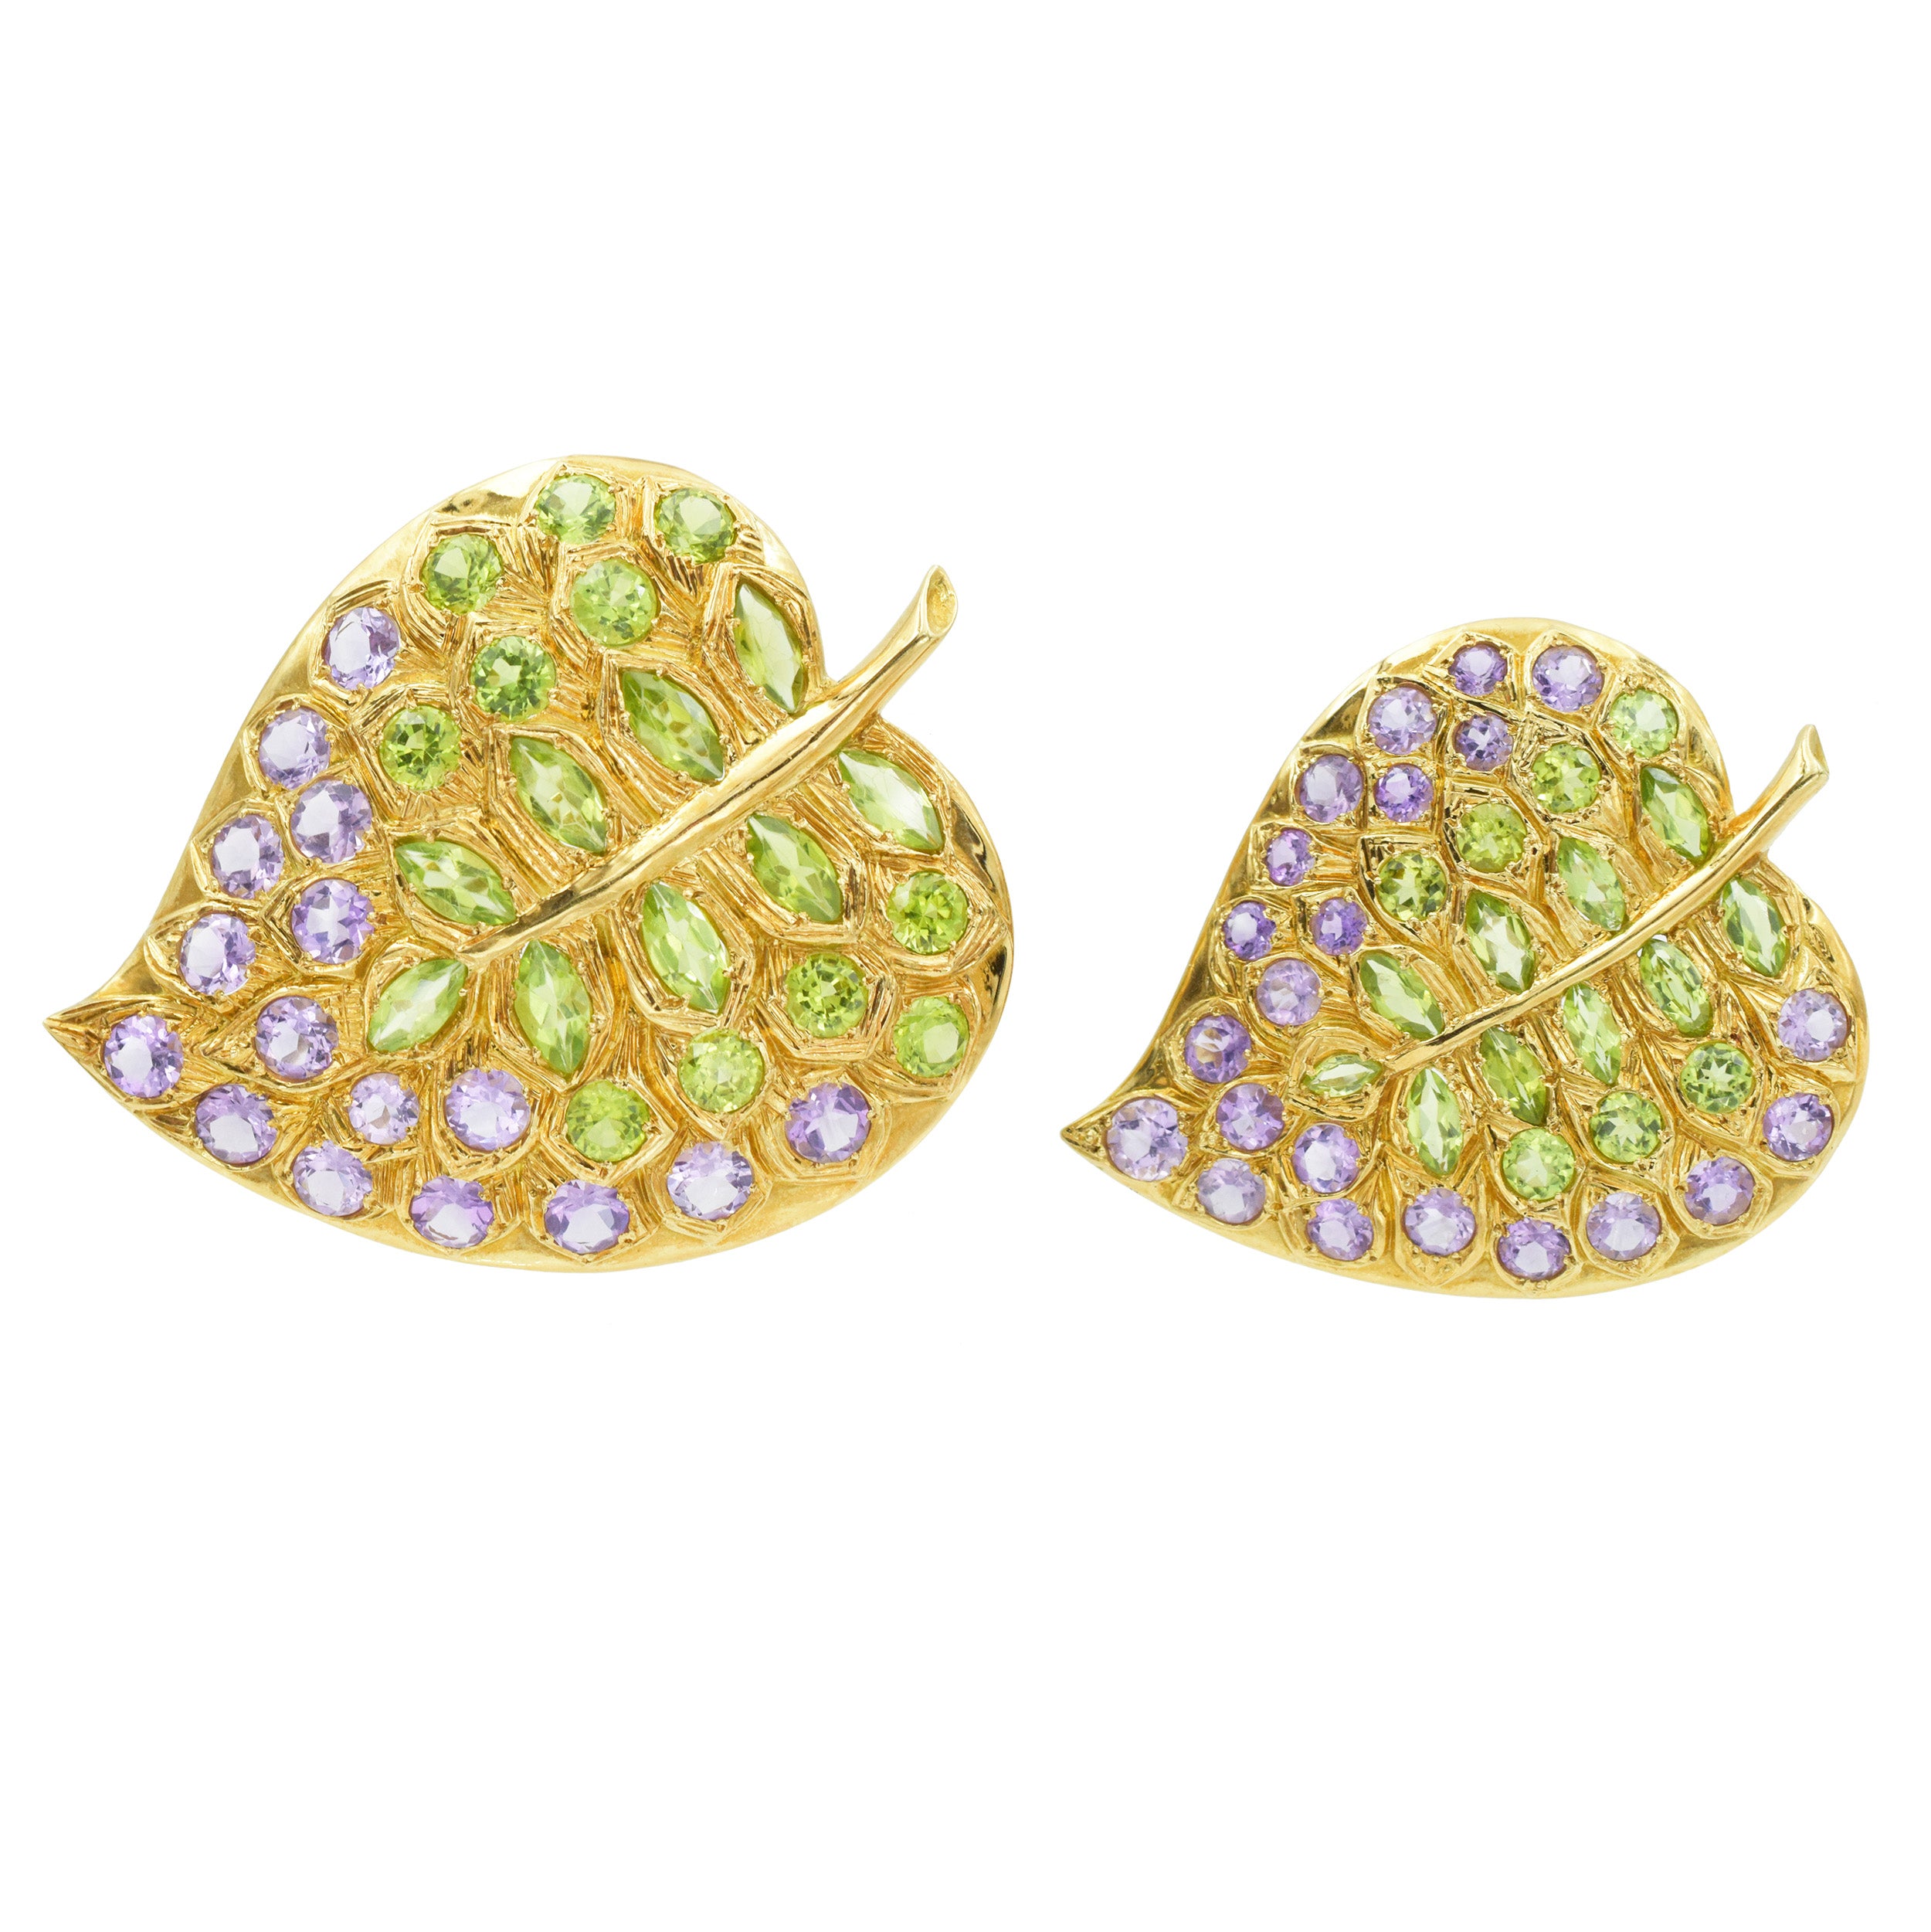 Pair of amethyst and peridot leaf brooches in 18k yellow gold.